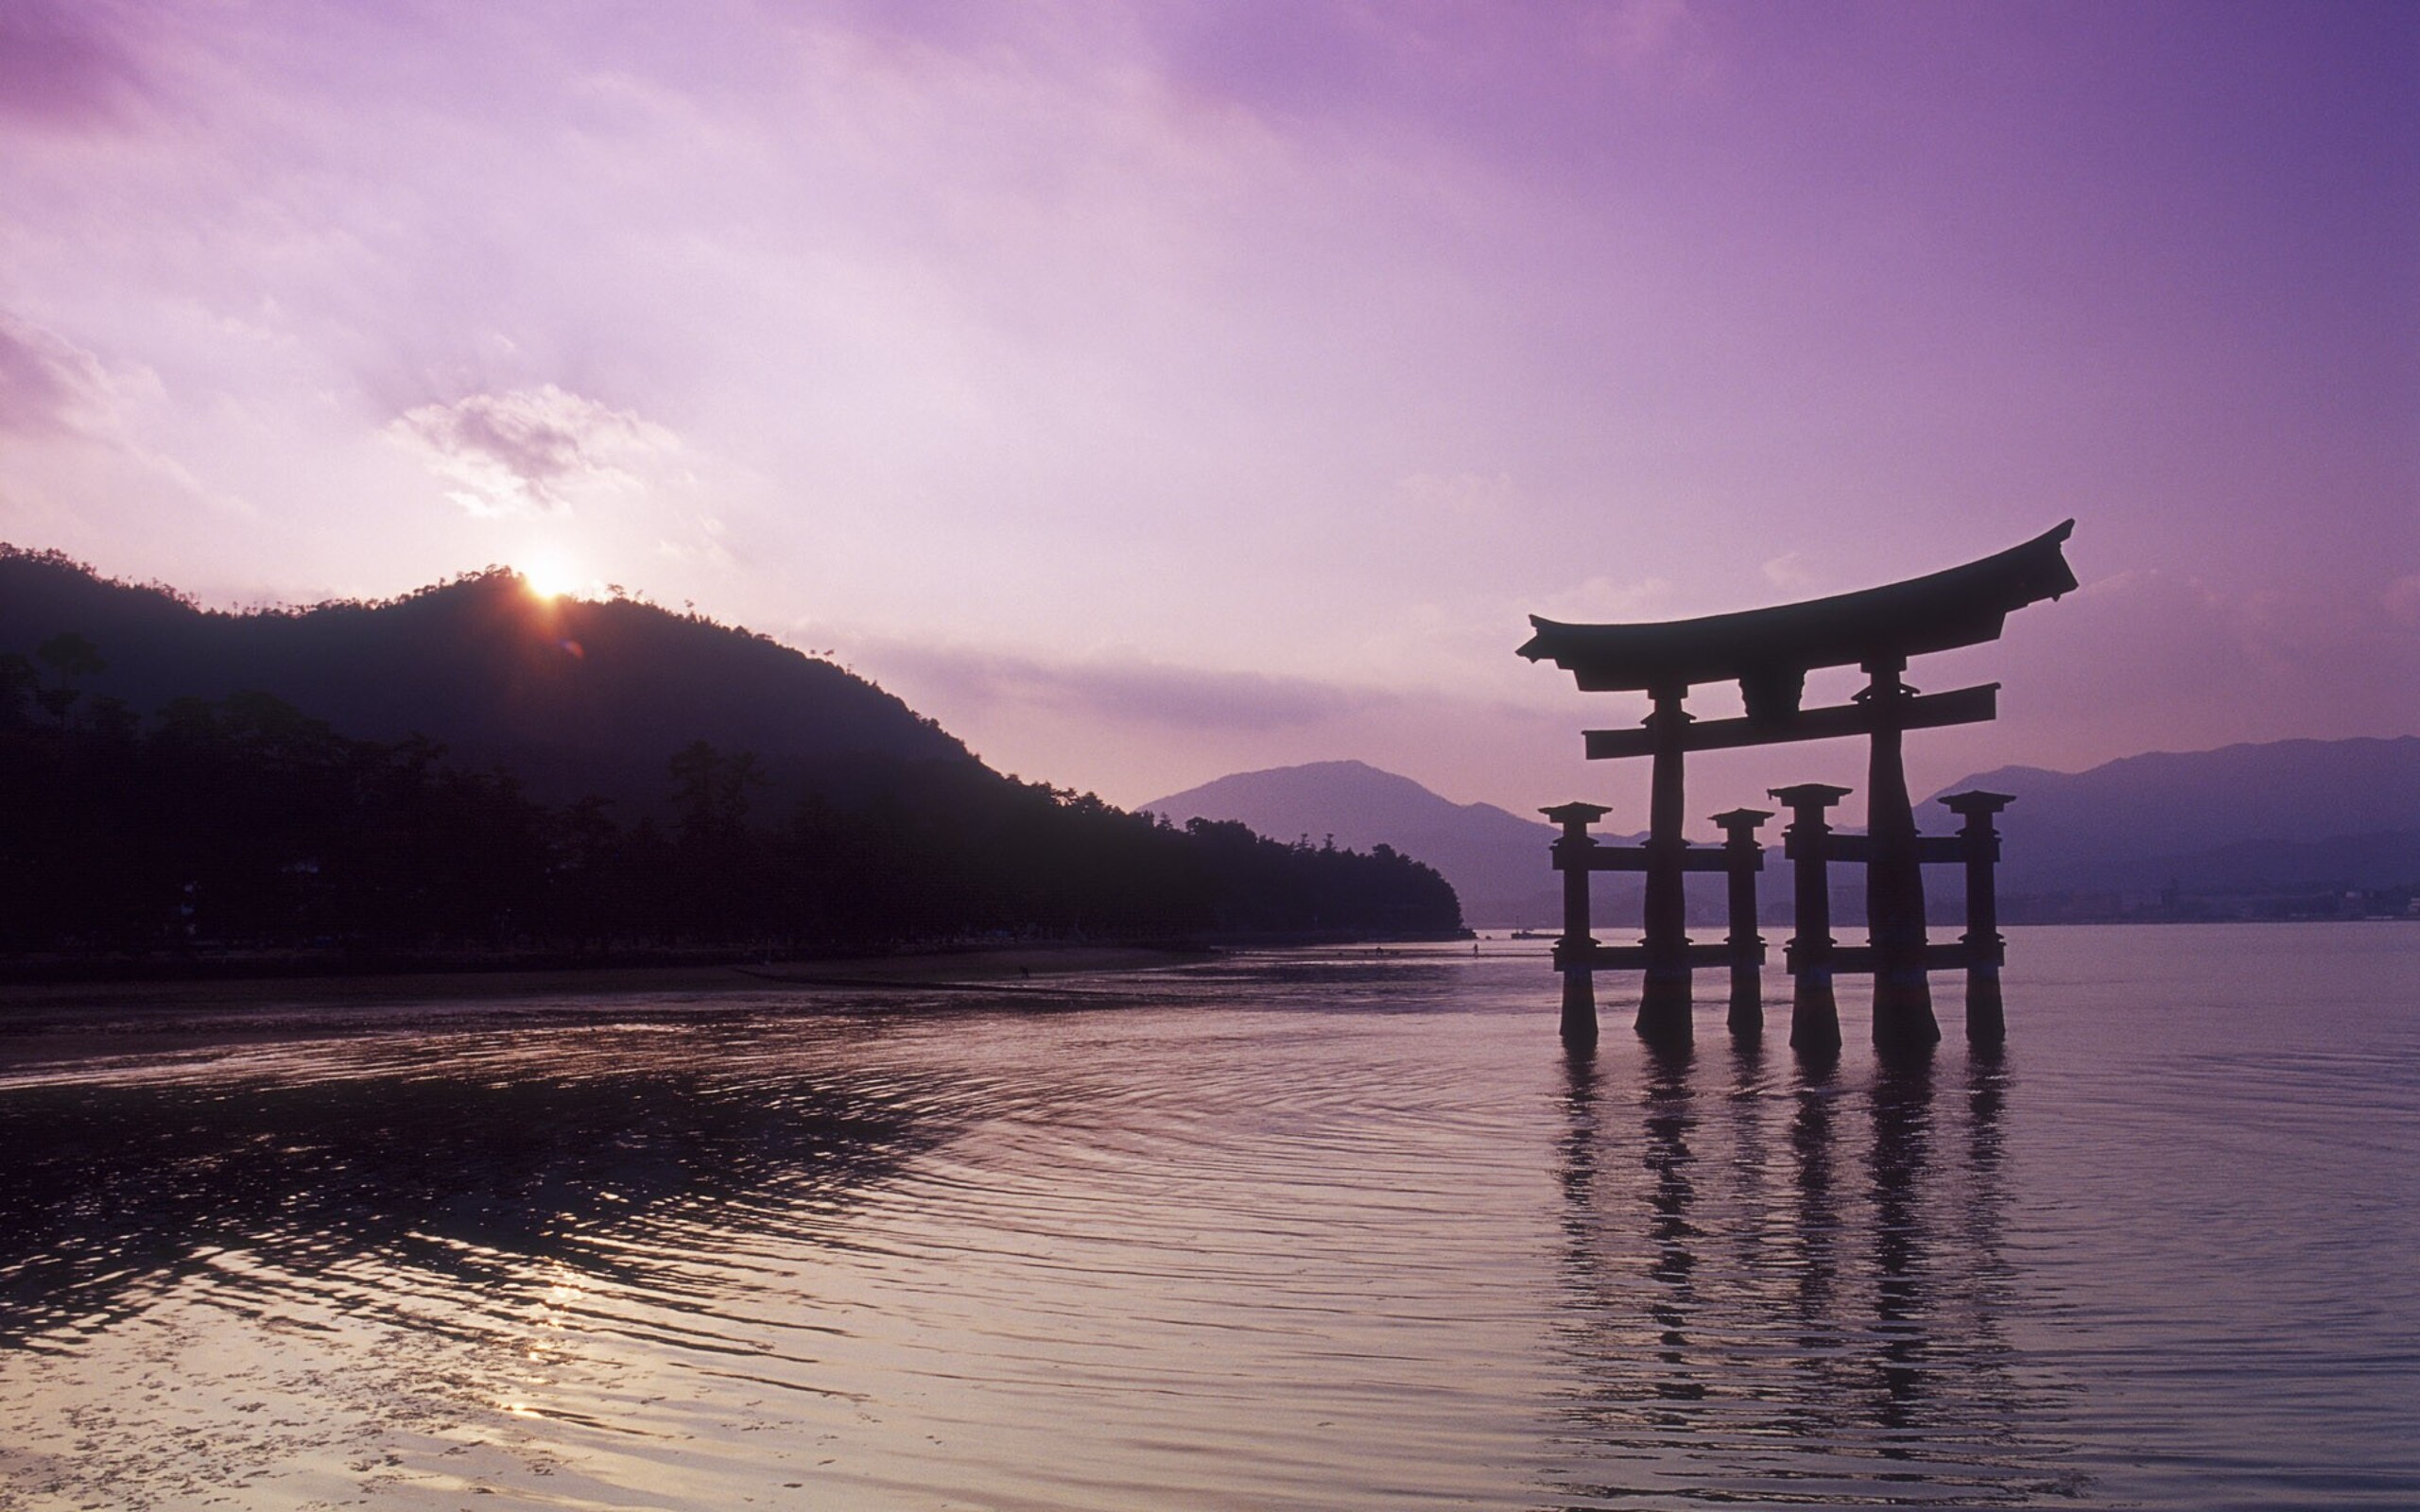 A beautiful sunset over a lake with a torii gate in the foreground. Tags: nature, sunset, lake, torii gate - 2560x1600, Japan, lake